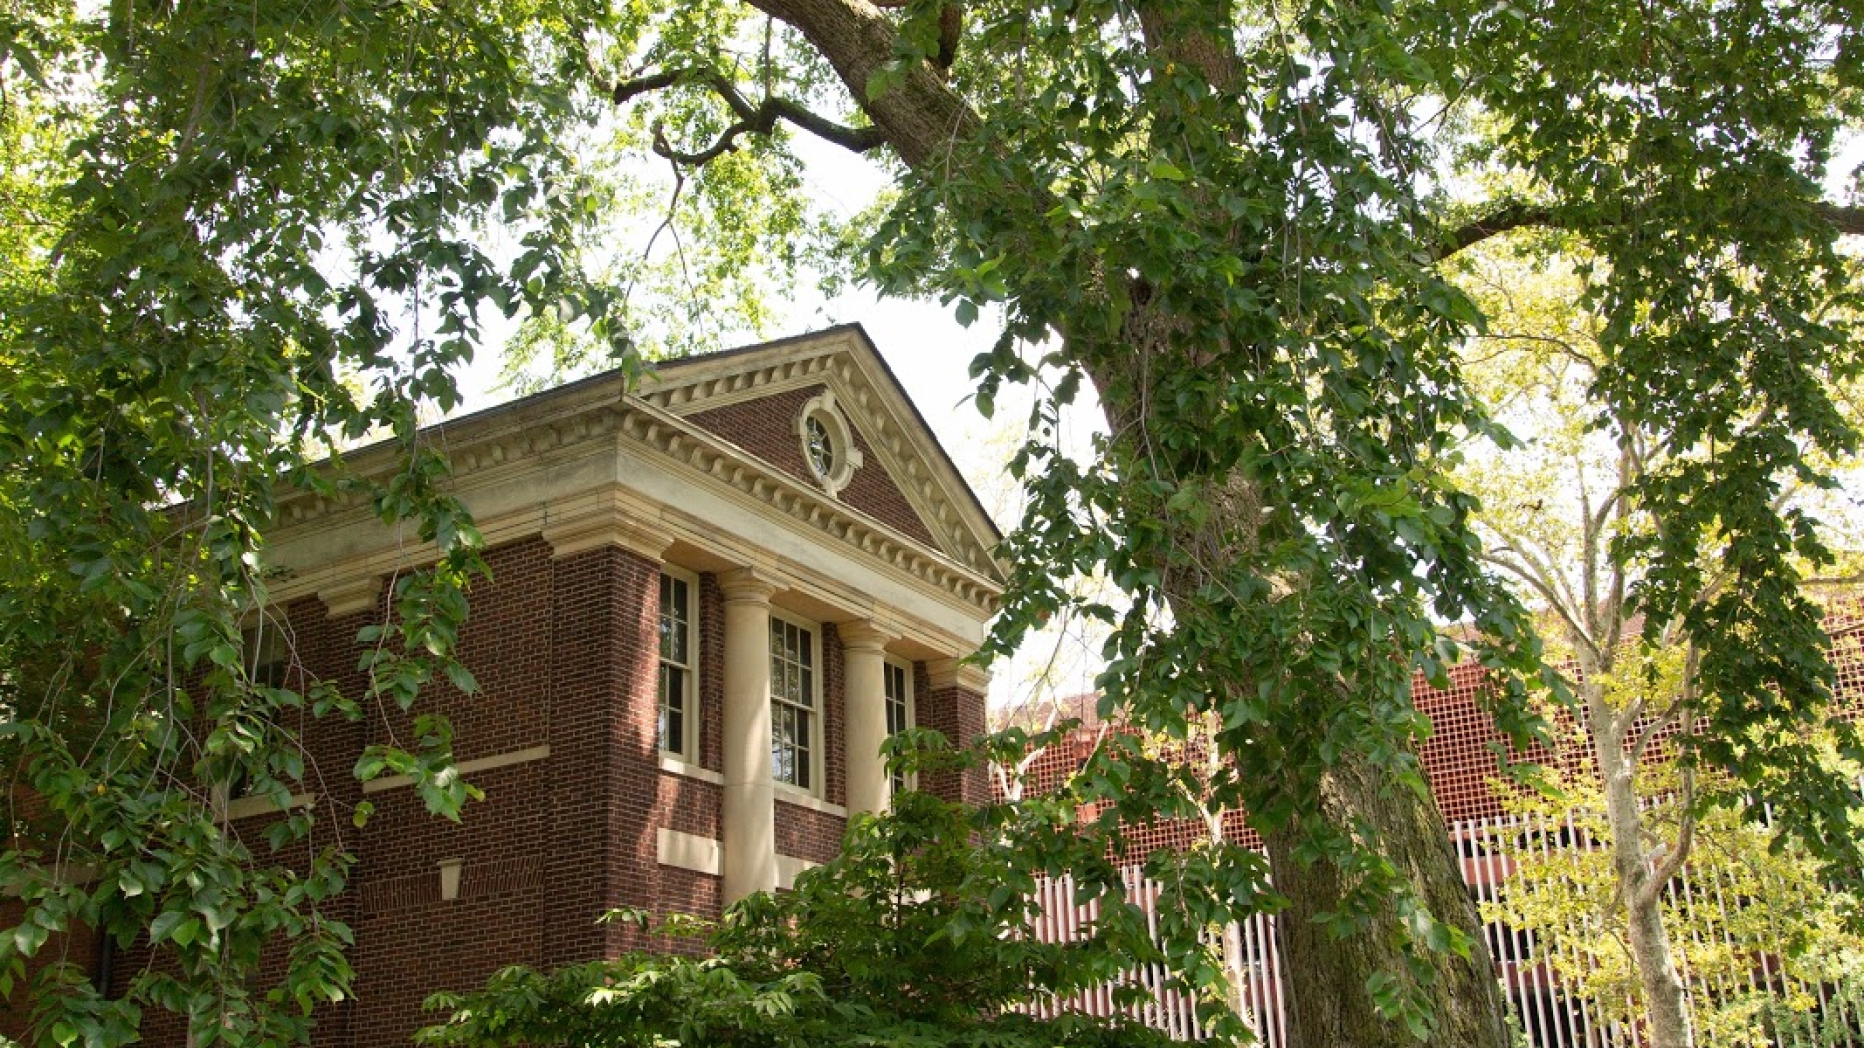 Lush landscaping surrounds a brick building with doric columns. A large sweeping free is in the foreground. 